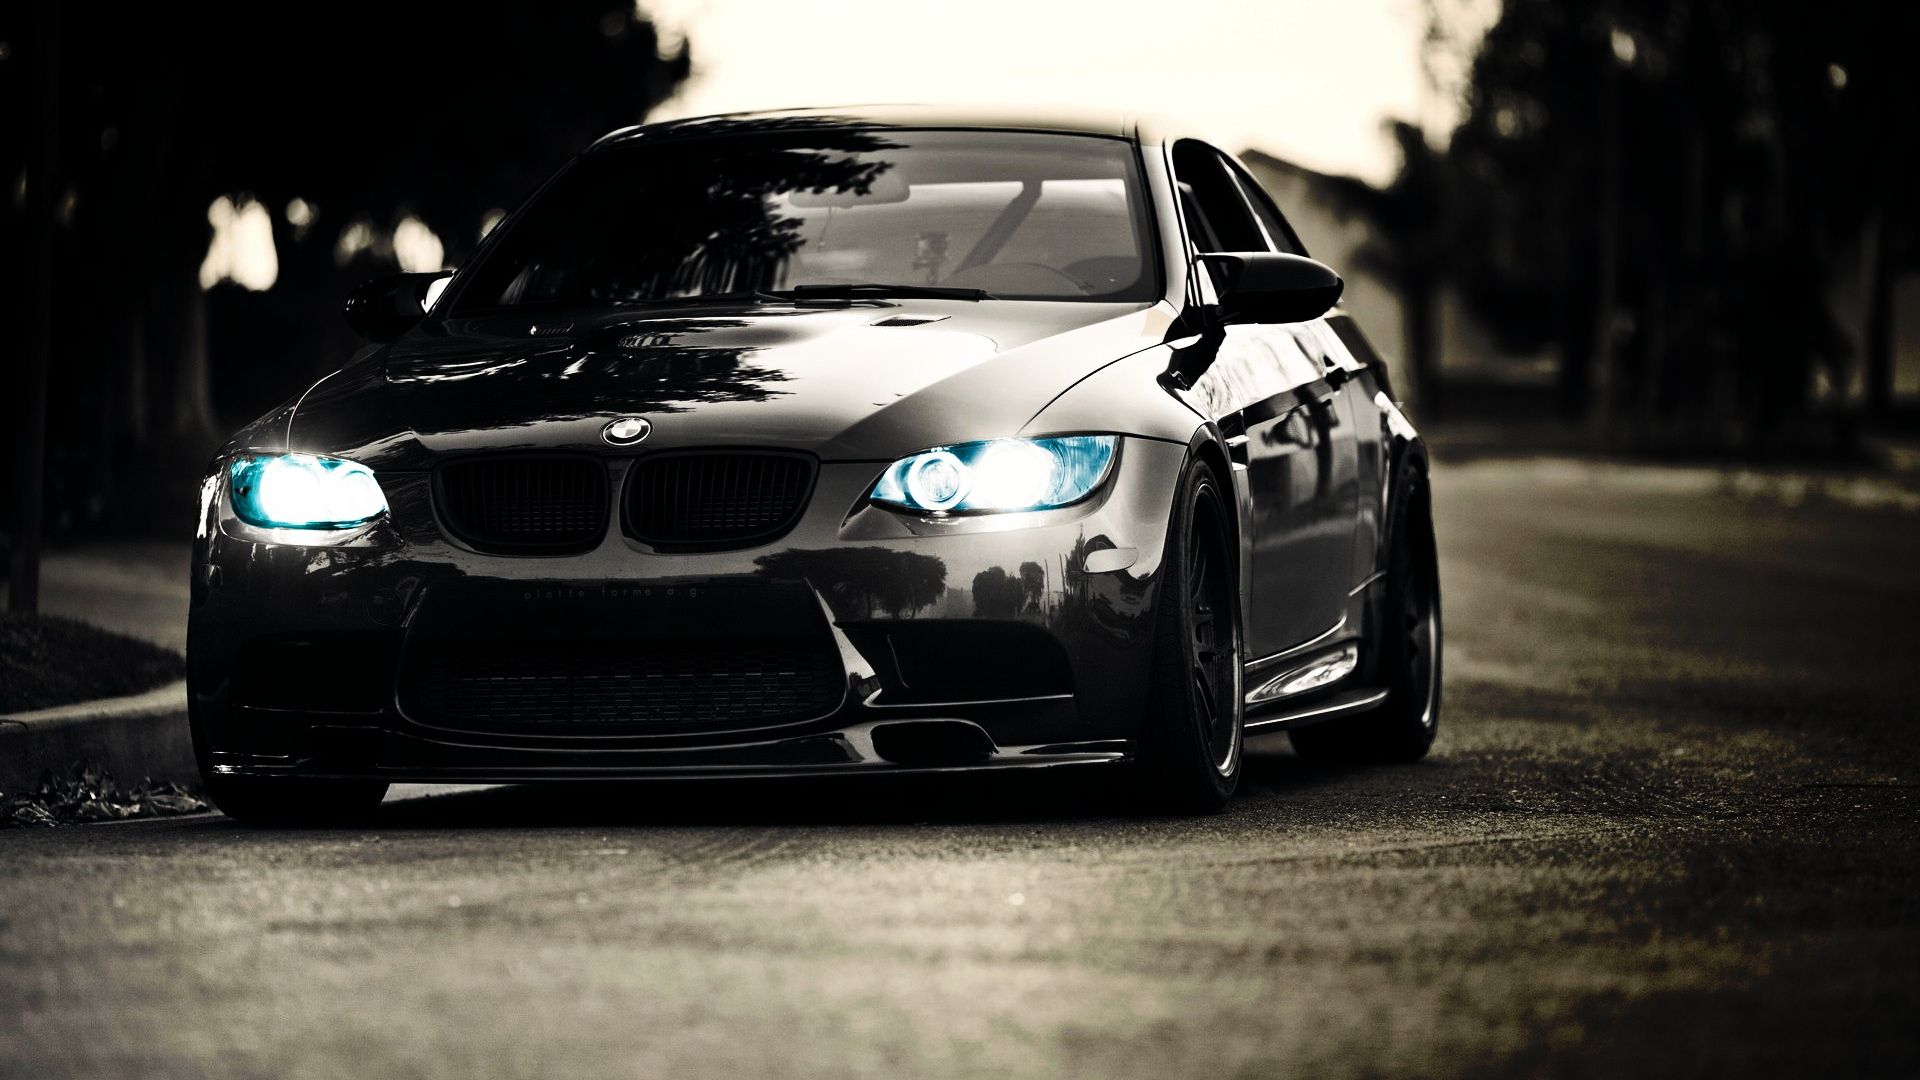 Desktop Wallpaper Bmw M3 Tuning Car, Hd Image, Picture, Background, 5e4nxd